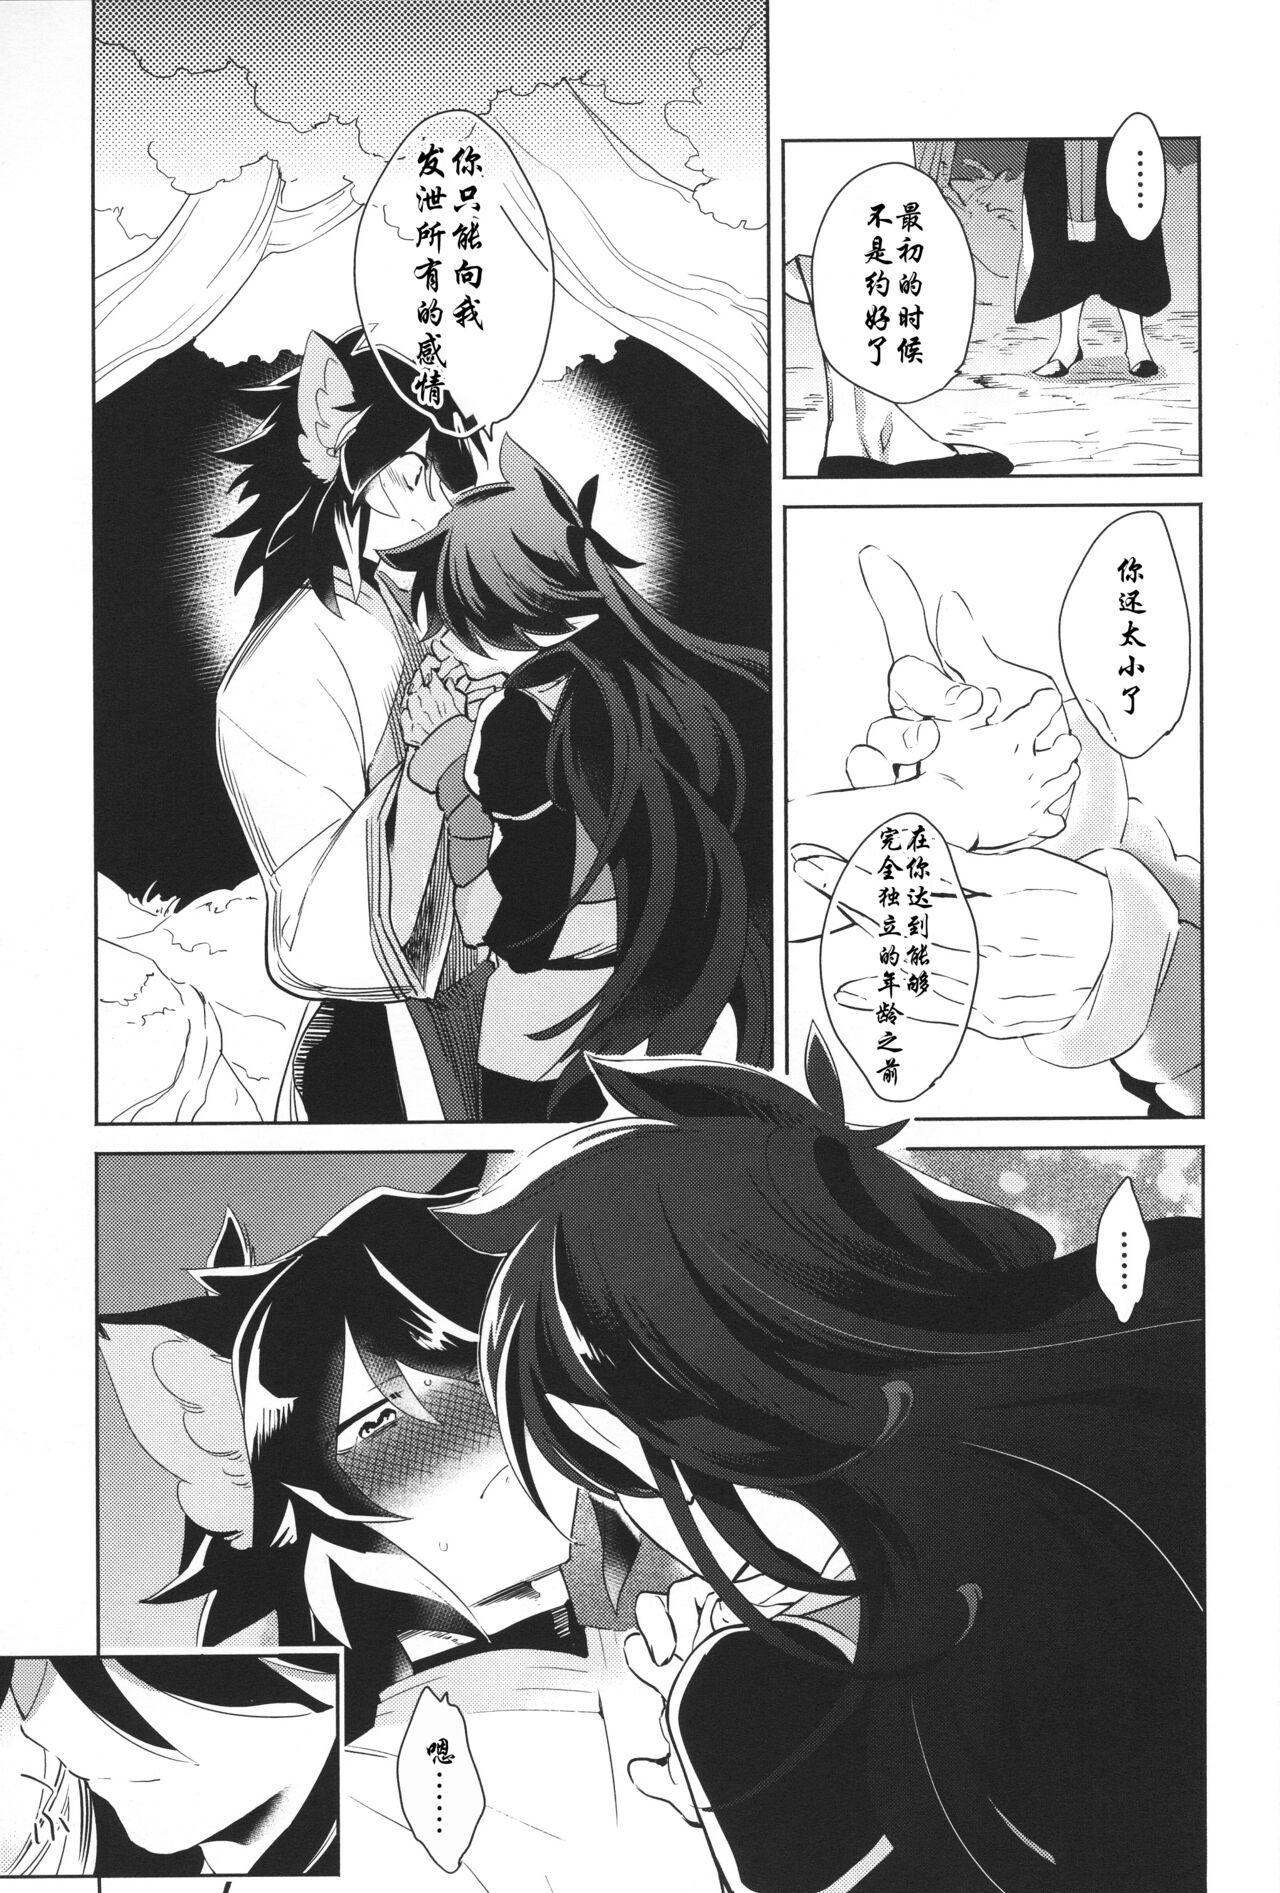 Blacksonboys 籠の鳥 - The legend of luo xiaohei Game - Page 10